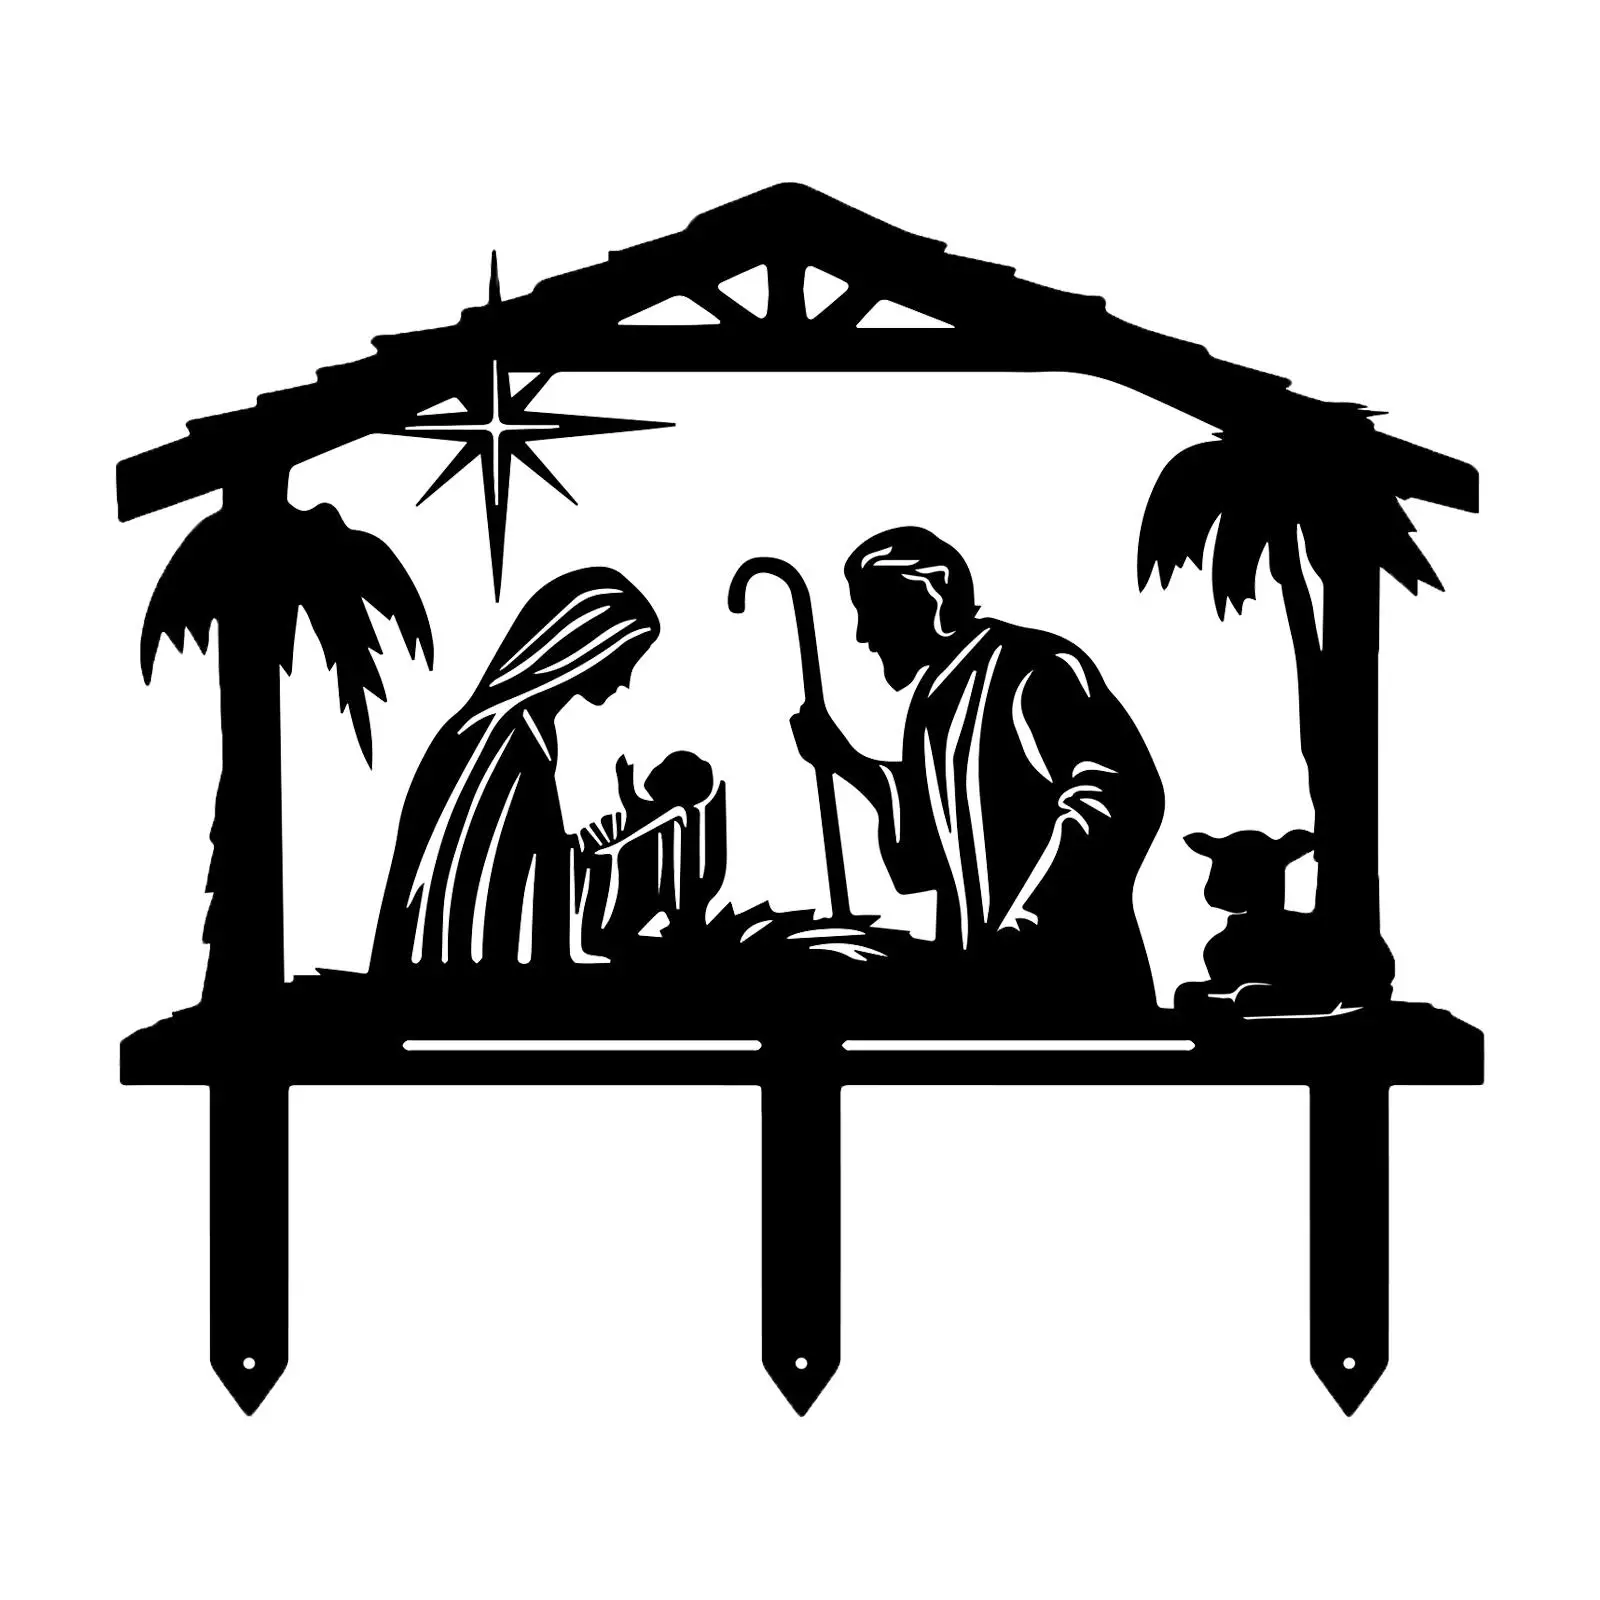 Nativity Scene Outdoor Yard Stakes Nativity Scene Yard Sign Display Silhouette Stake for Lawn Christmas Outdoor Holiday Garden